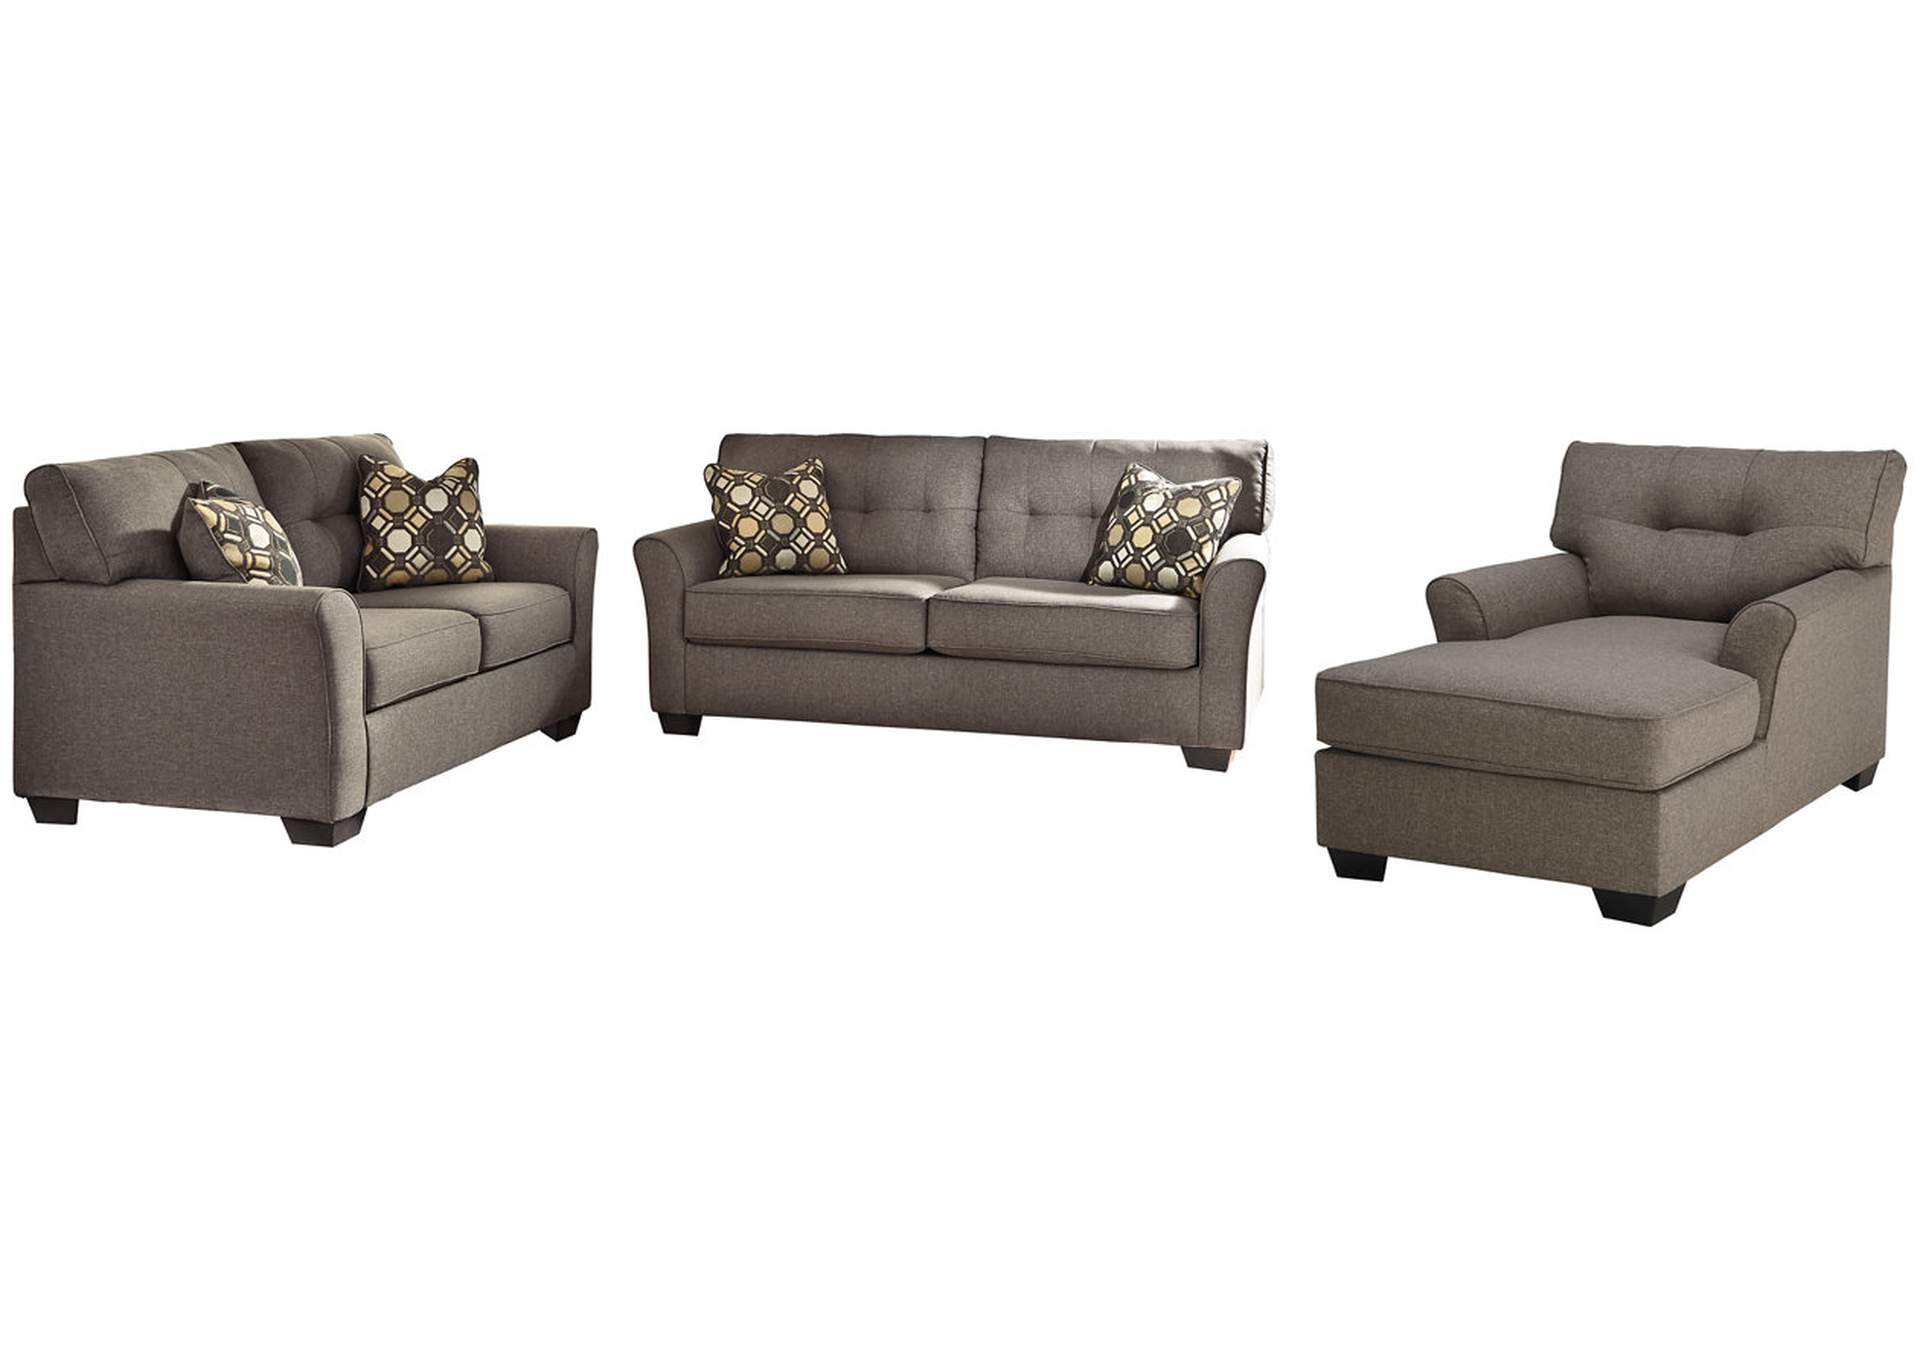 Tibbee Sofa Loveseat And Chaise